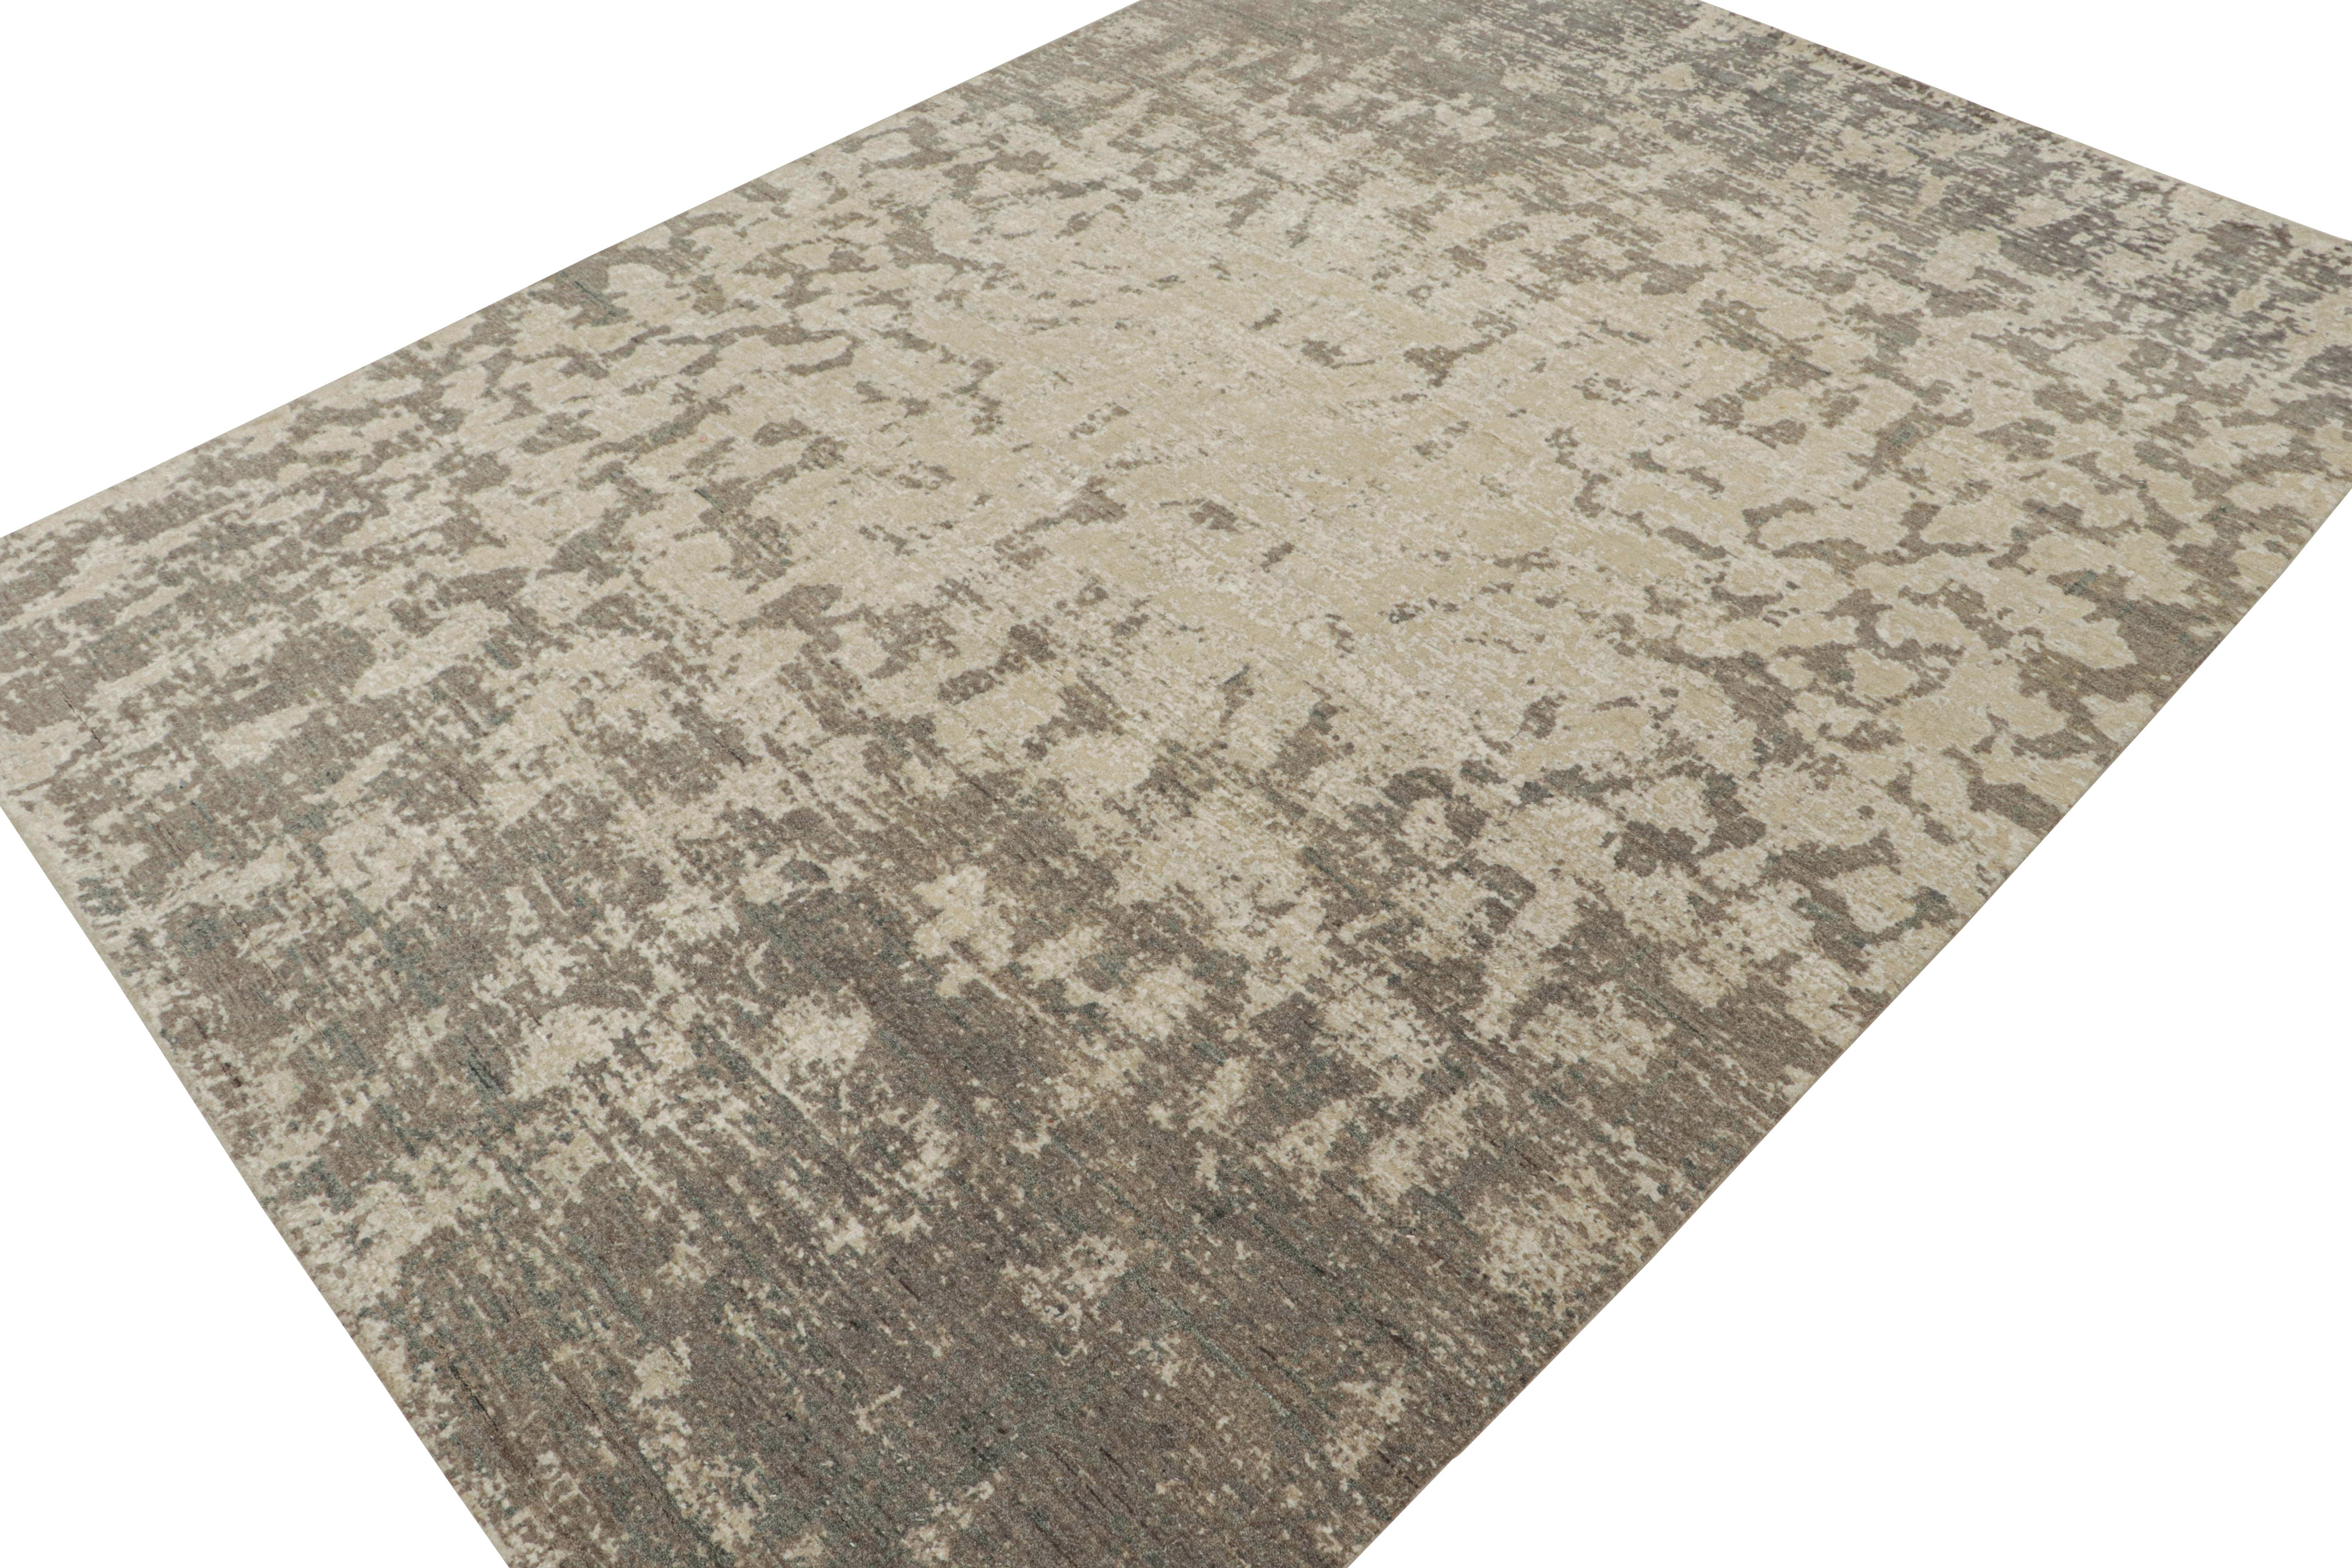 Indian Rug & Kilim’s Modern Abstract Rug in Beige-Brown and Gray Patterns For Sale